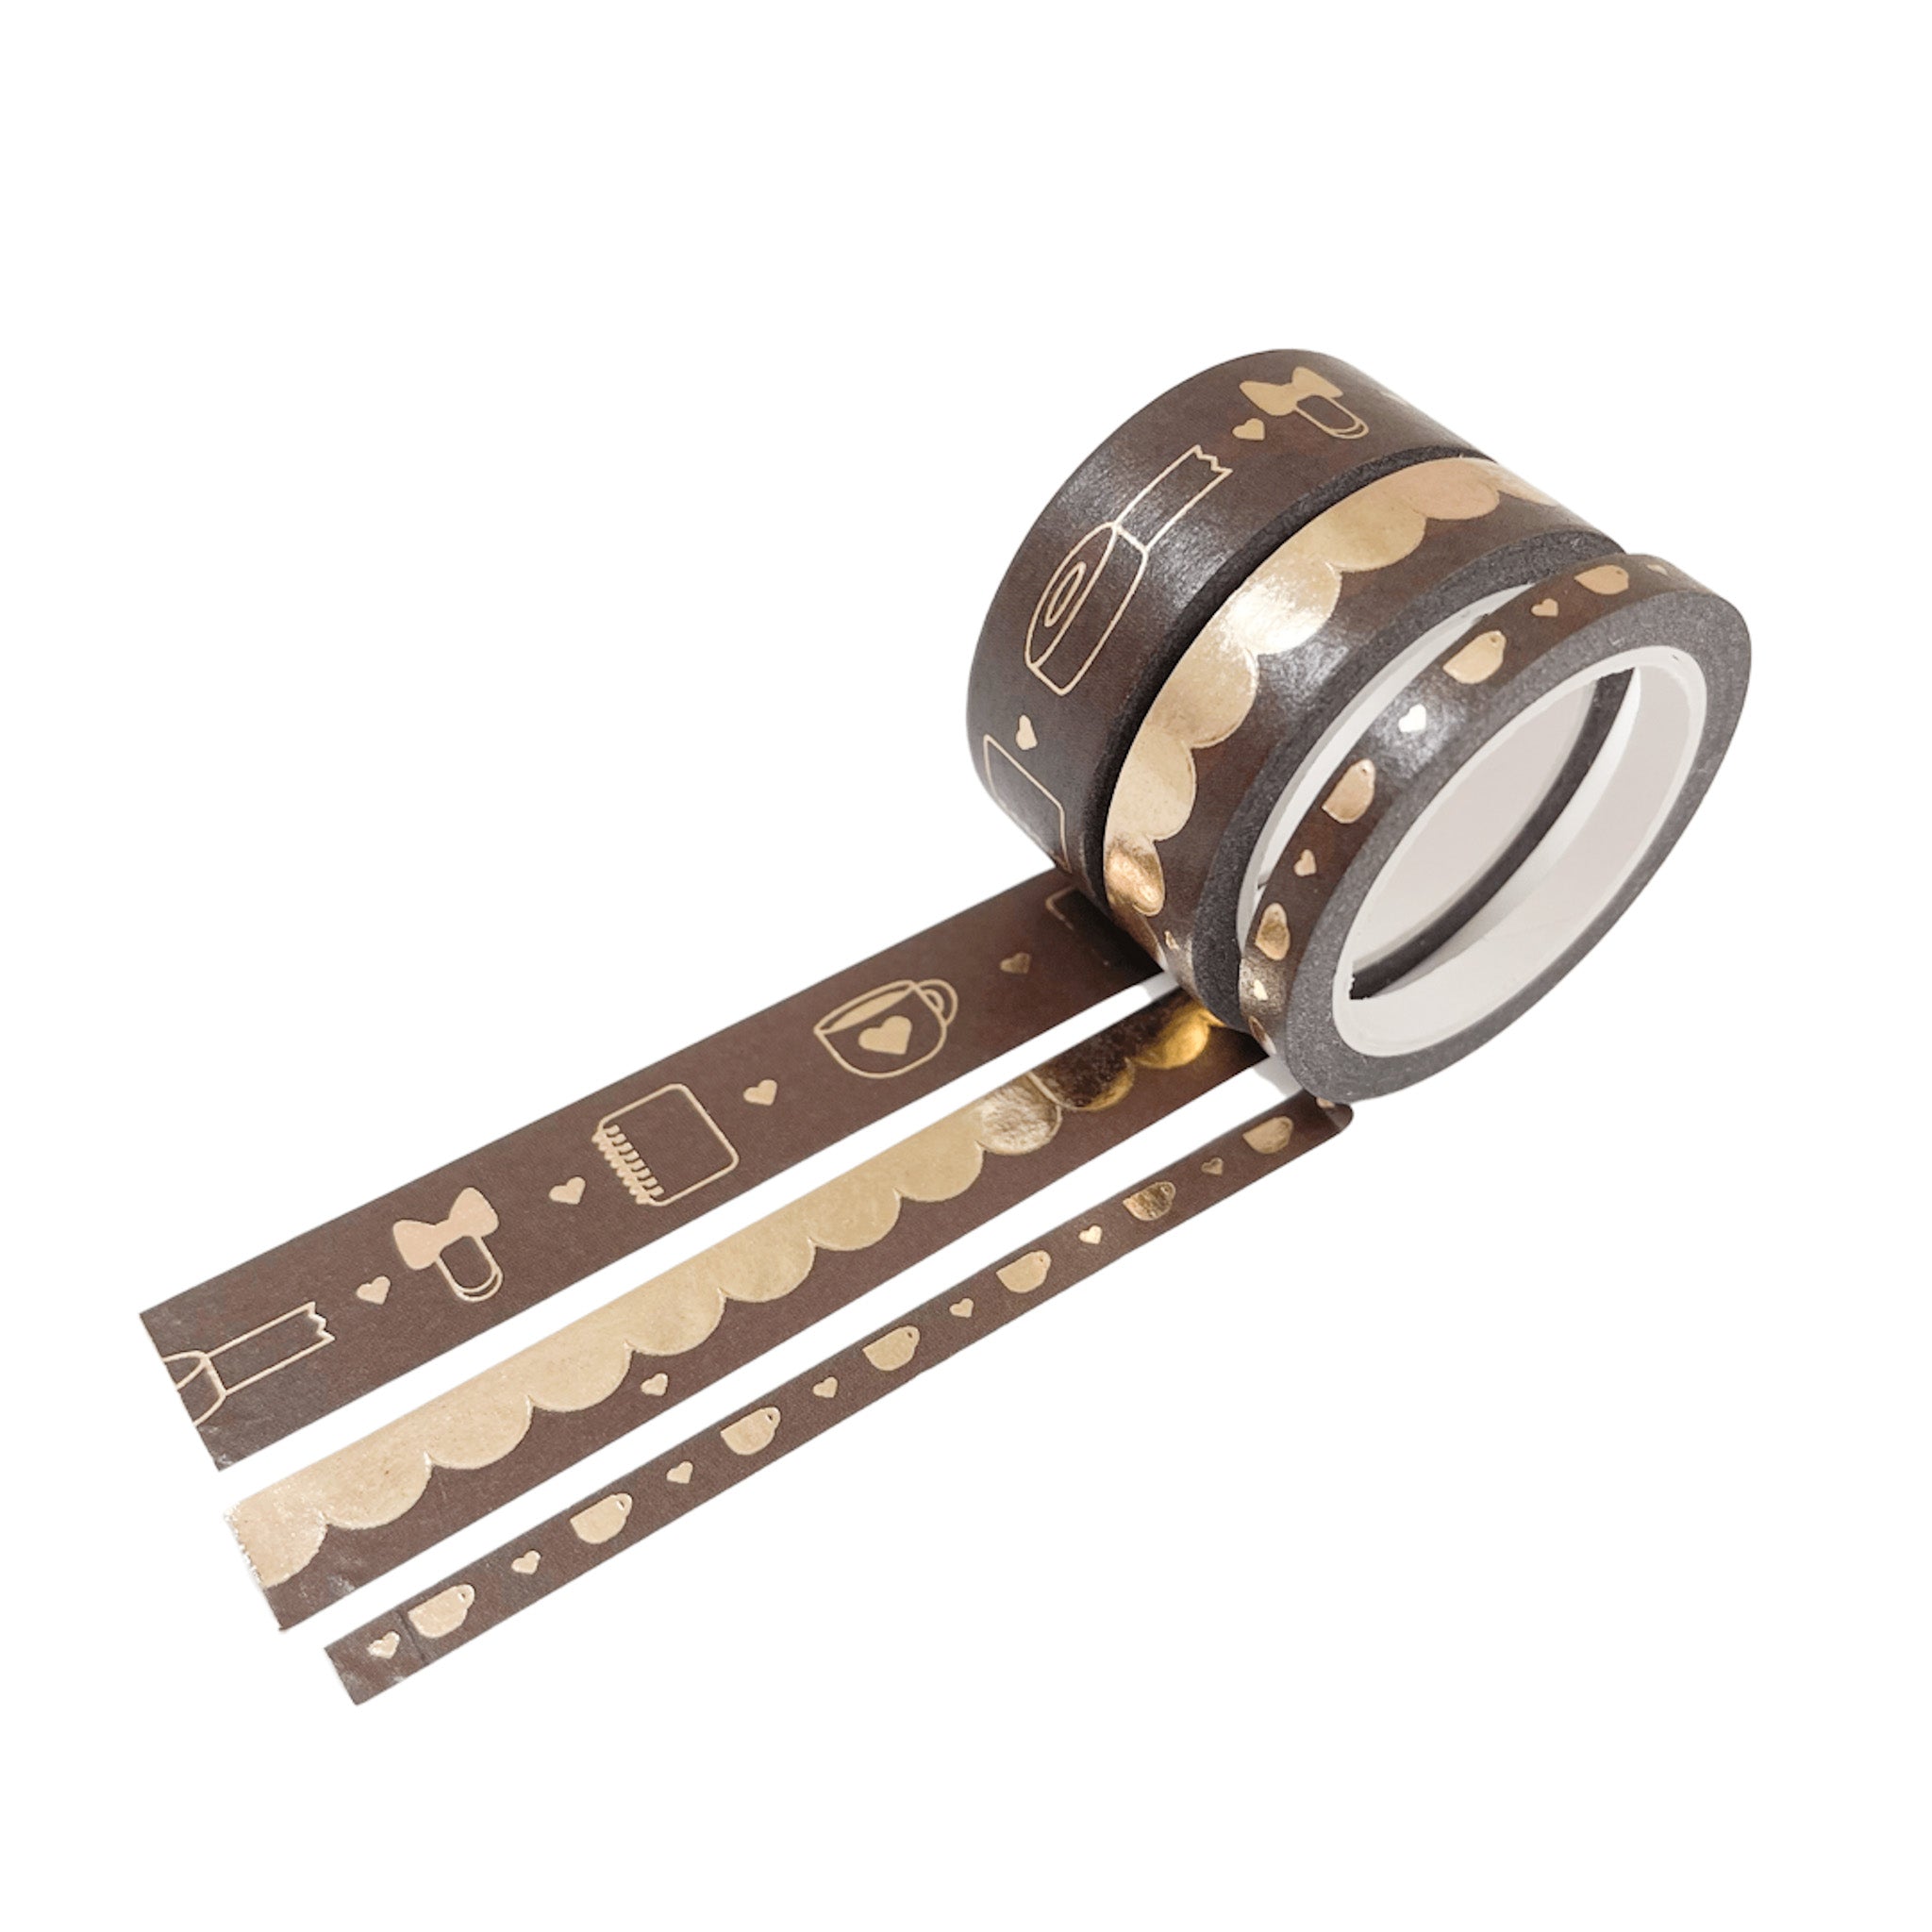 Gold Foil Washi Tape Collection: 8 sets to choose from